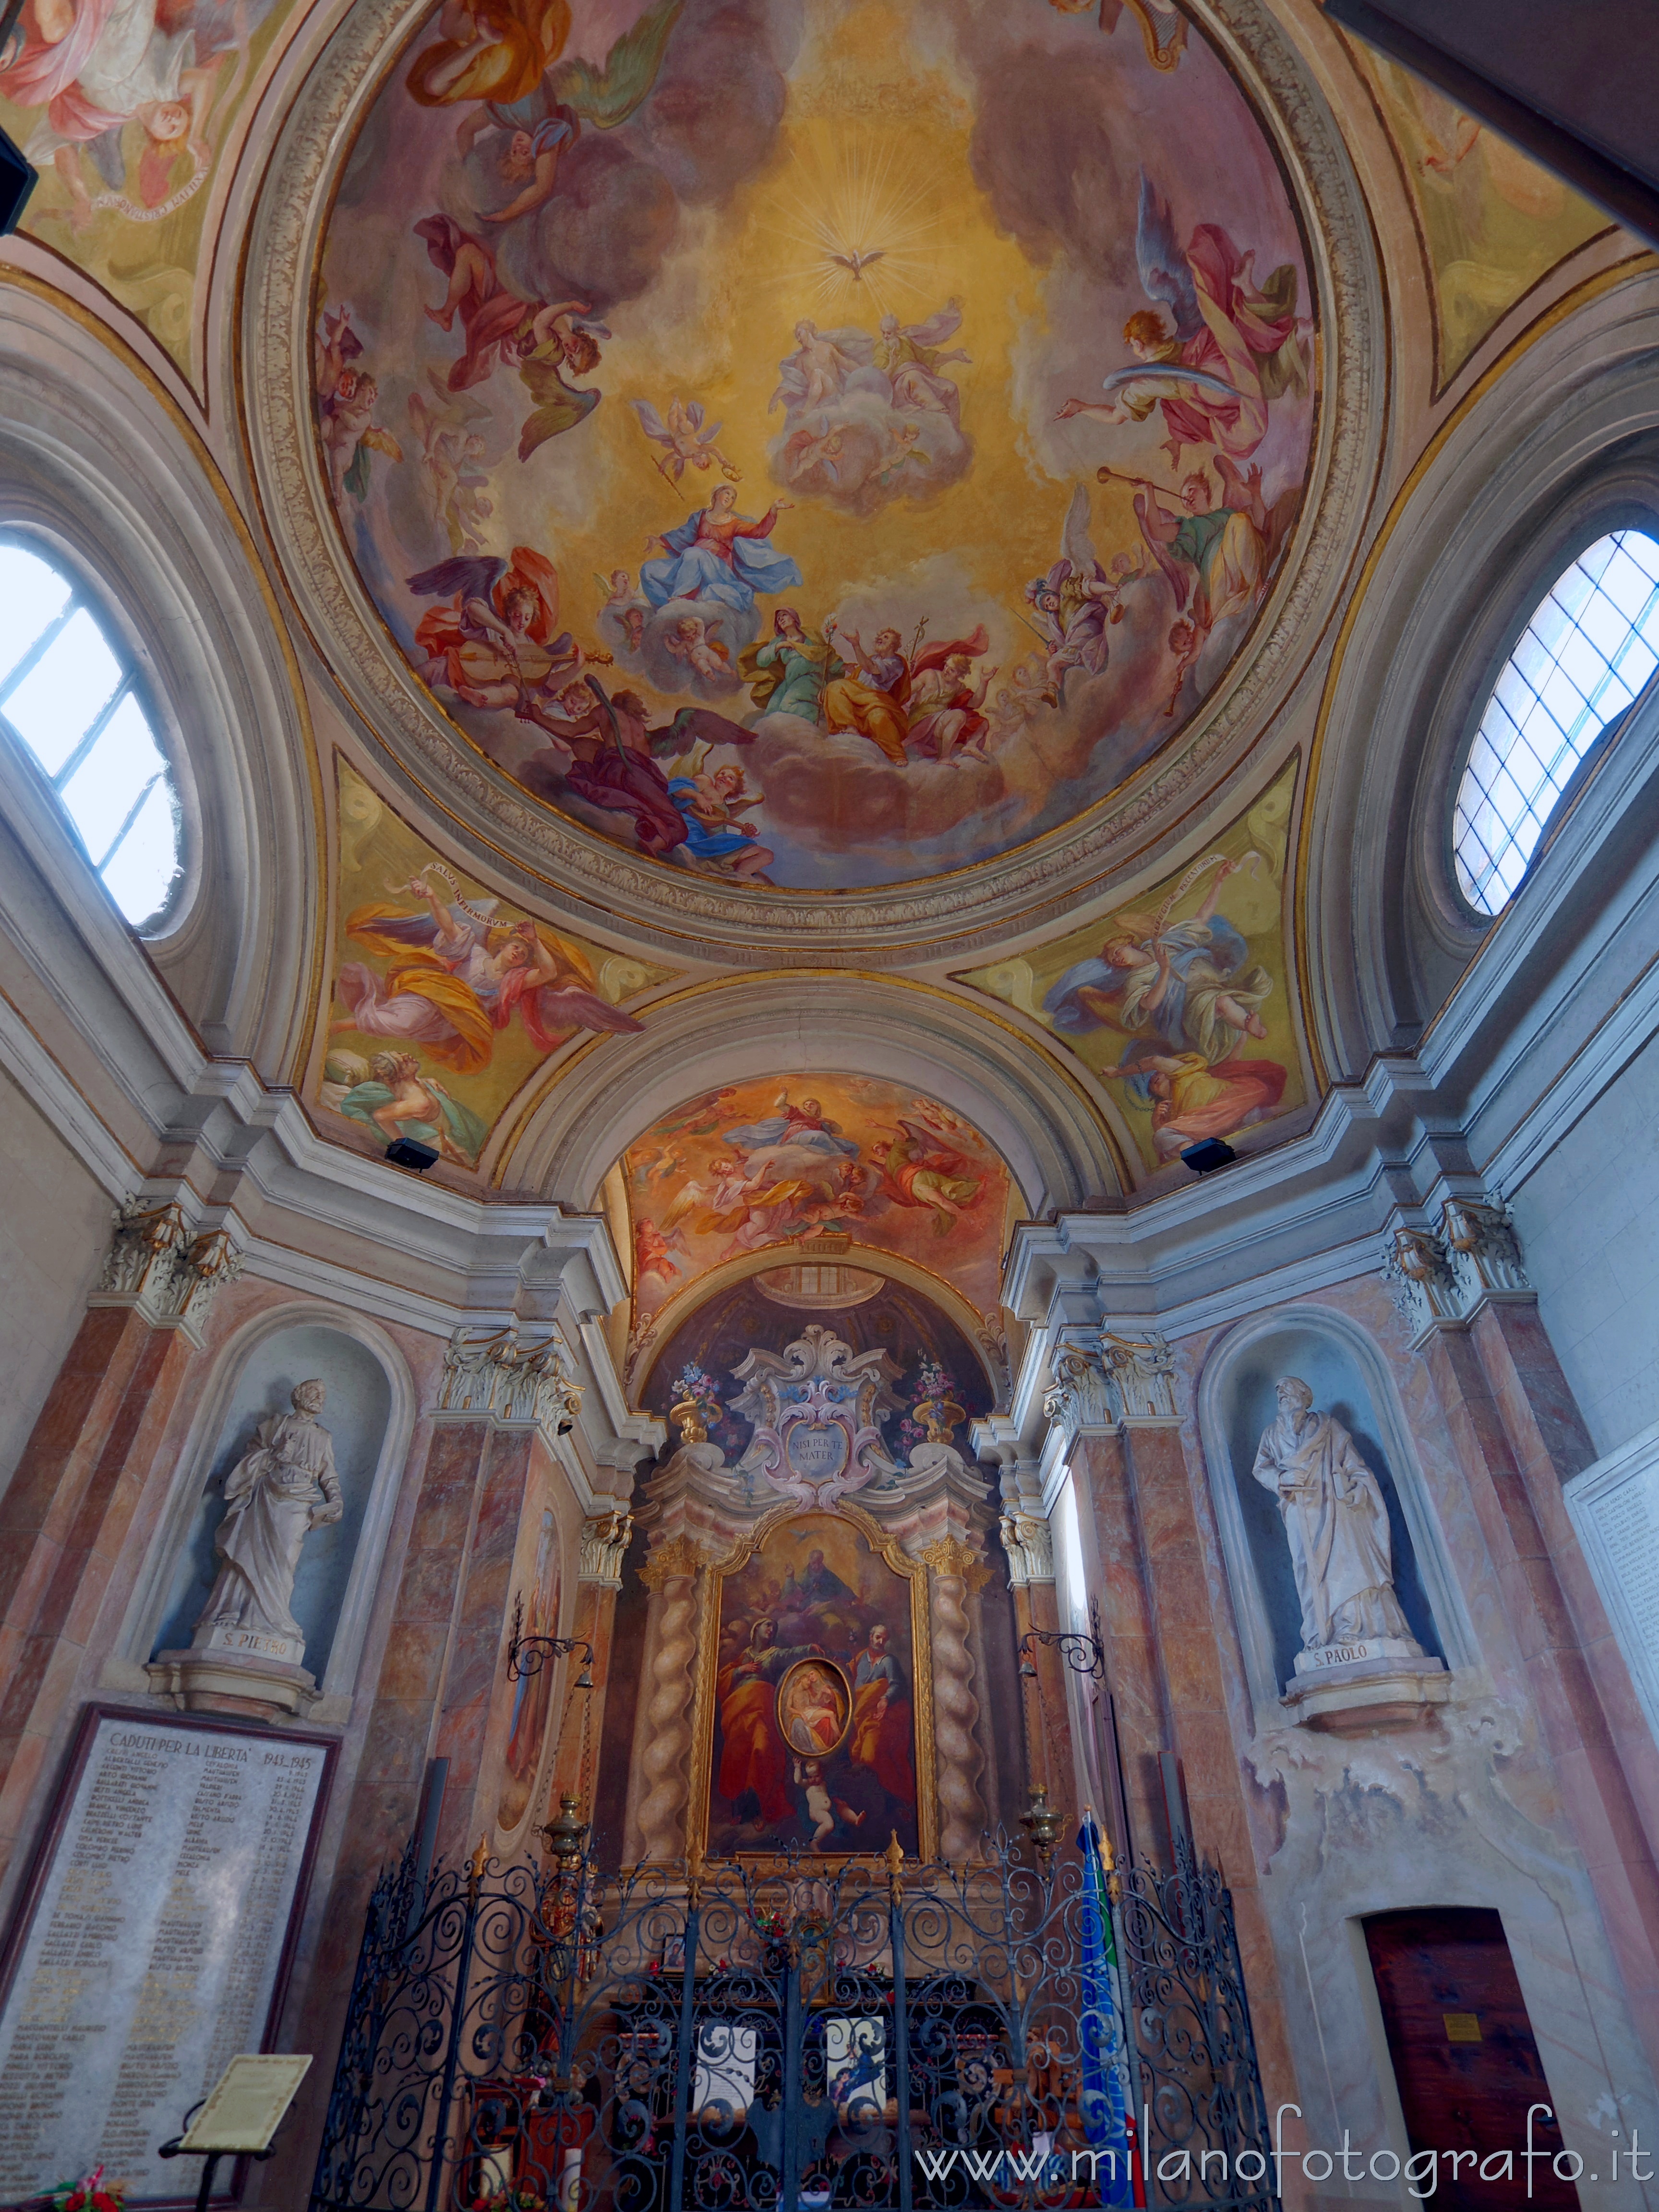 Busto Arsizio (Varese, Italy): Interior and frescoed dome of the Civic temple of Sant'Anna - Church of the Blessed Virgin of Graces - Busto Arsizio (Varese, Italy)